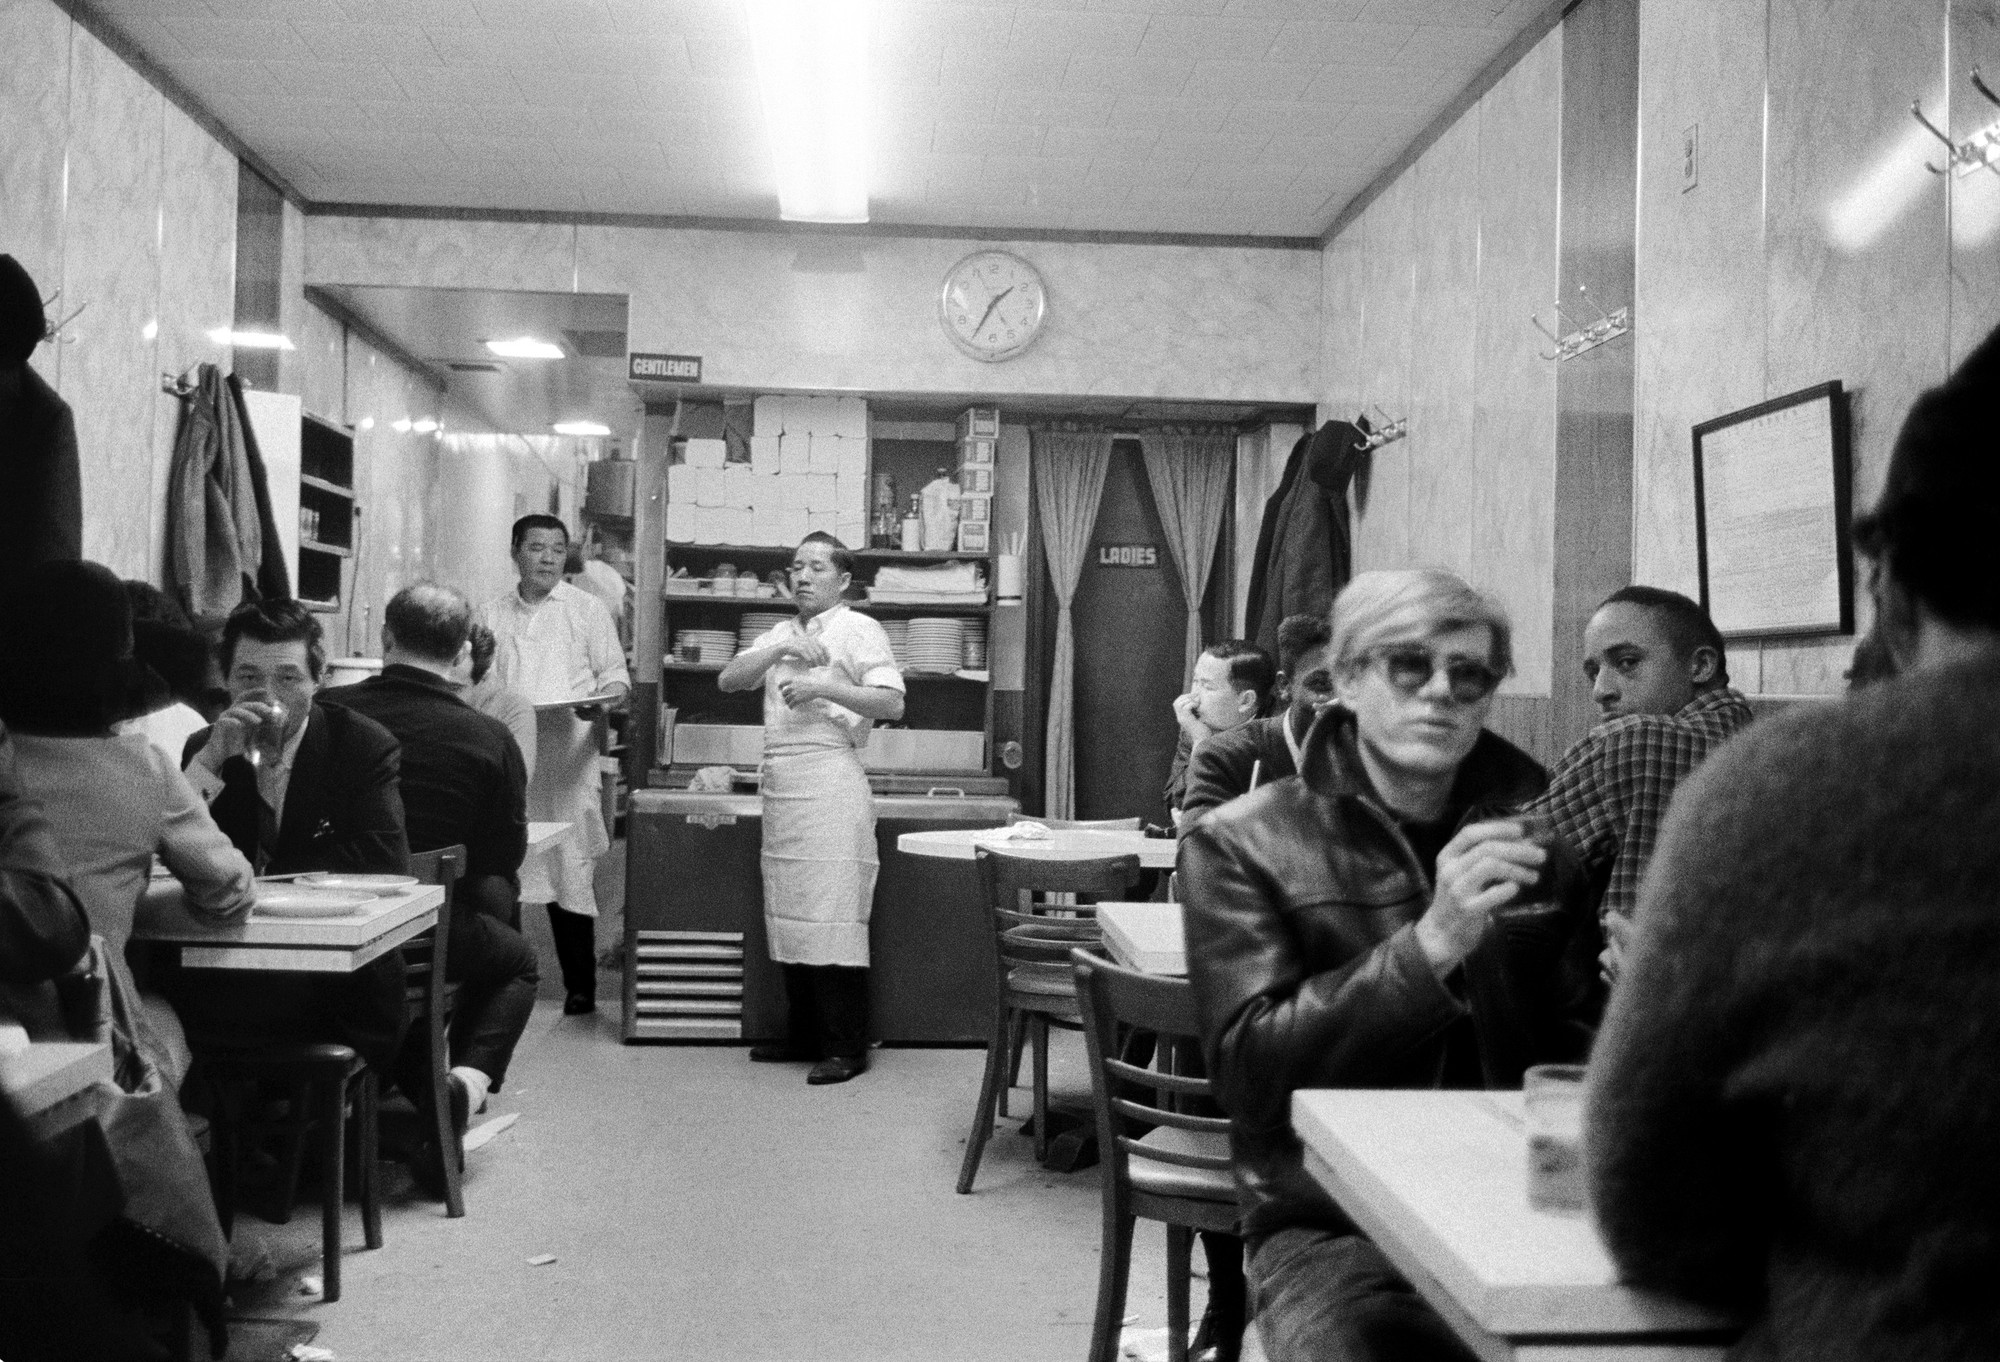 Stephen Shore (American, born 1947). _1:35 a.m., in Chinatown Restaurant, New York, New York._ 1965–67. Gelatin silver print, printed c. 1995, 9 × 13 1/2" (22.9 × 34.3 cm). Courtesy the artist and 303 Gallery, New York